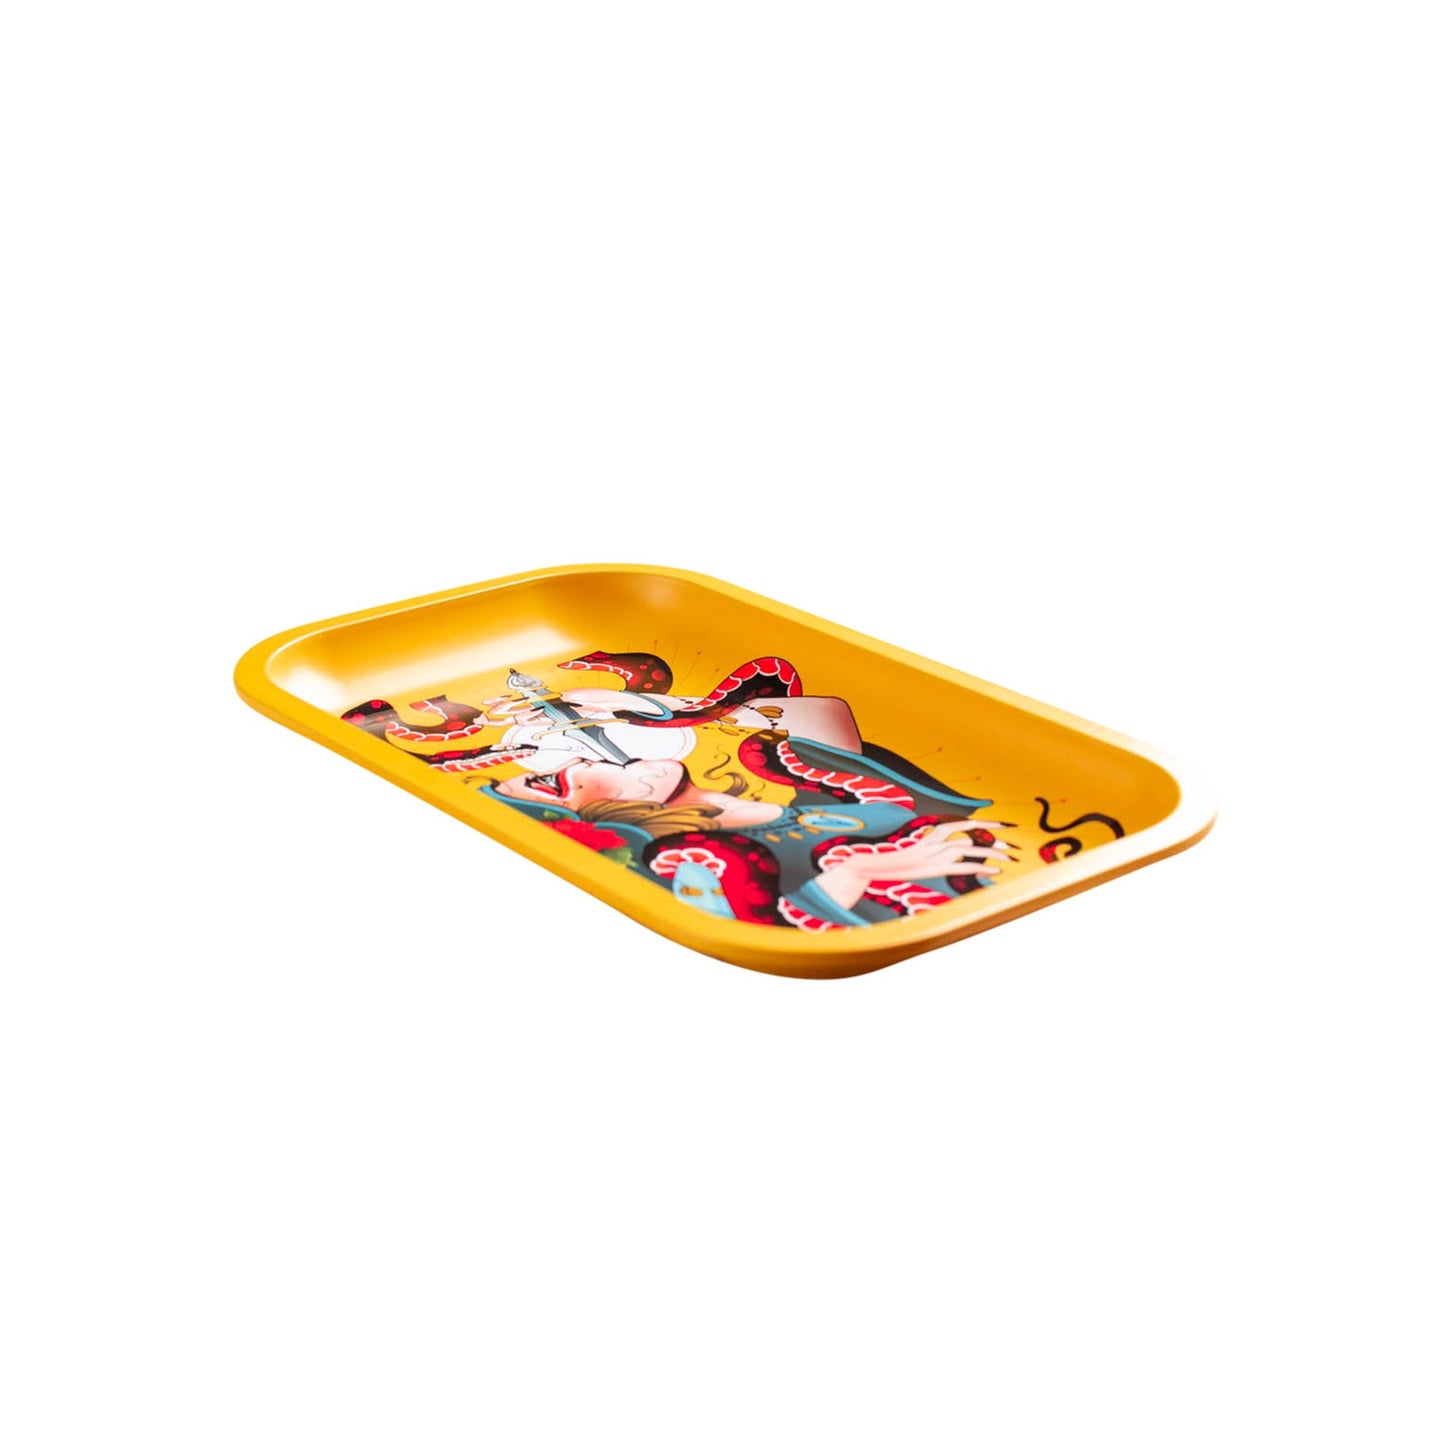 V Syndicate Serpentine Metal Rollin' Tray - Glasss Station